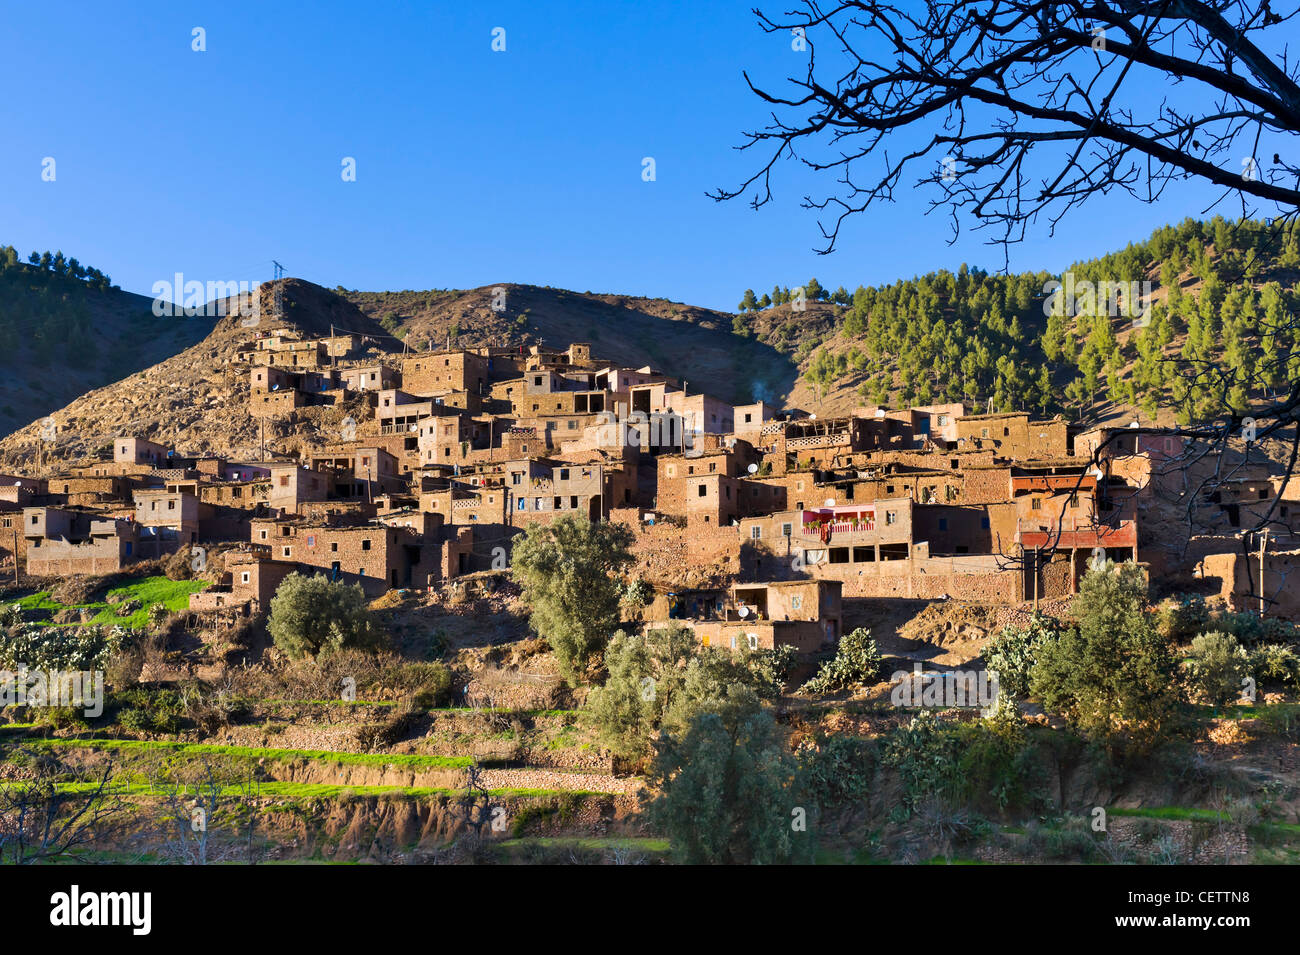 Berber village in the High Atlas Mountains between Oukaïmeden and Marrakech, Morocco, North Africa Stock Photo